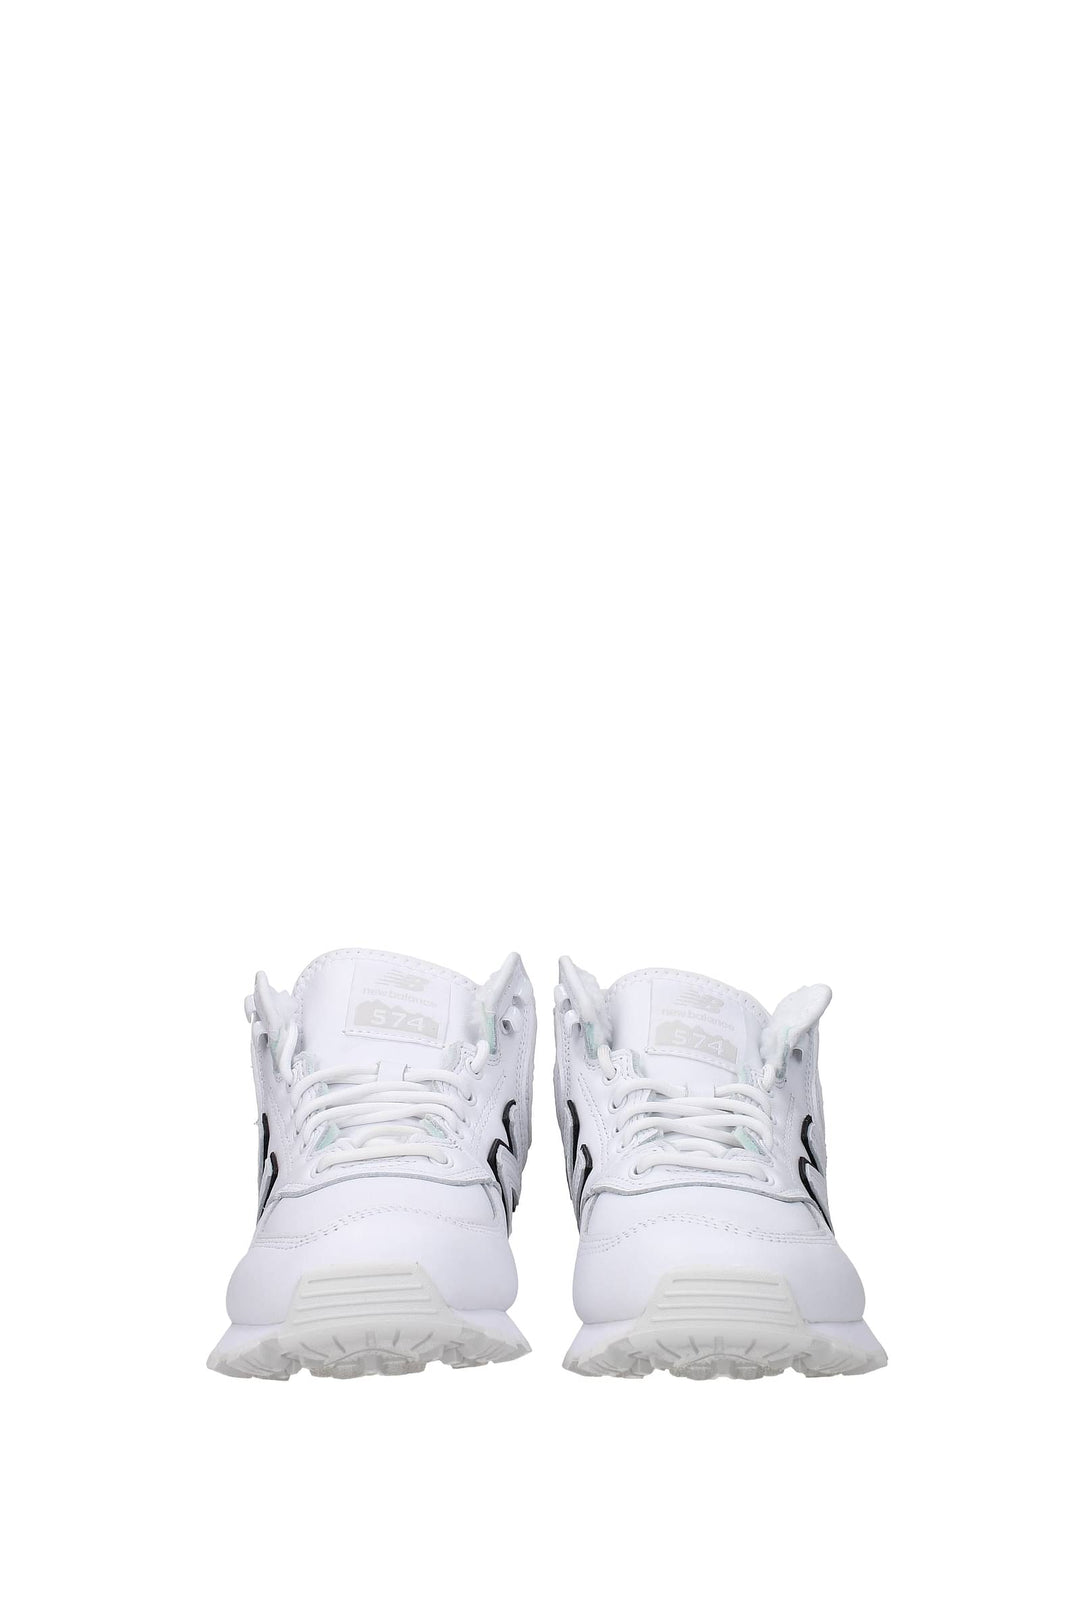 Sneakers Comme Des Garcons Pelle Bianco - New Balance - Uomo